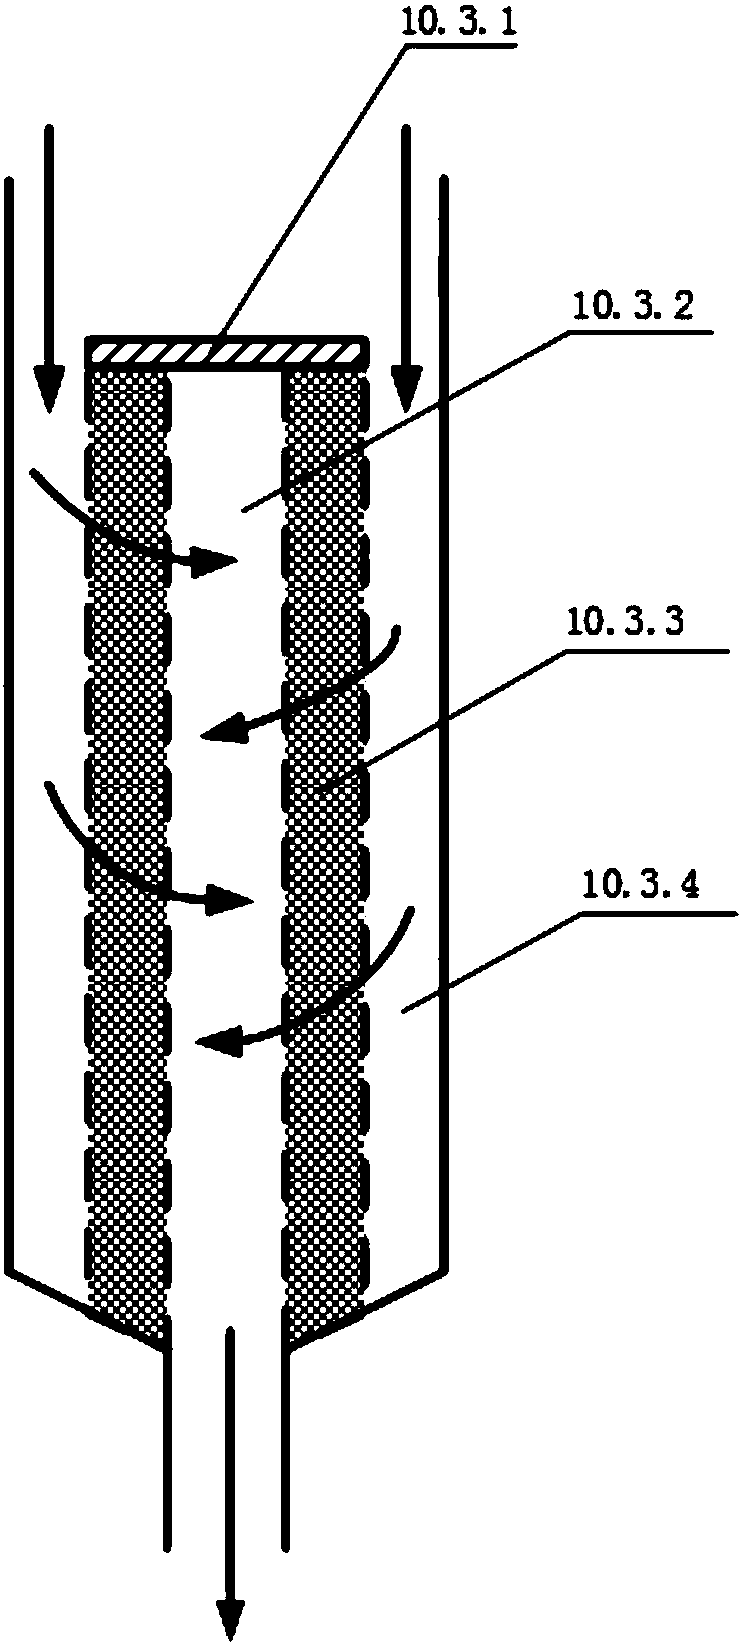 Built-in containment vessel filtering discharging system